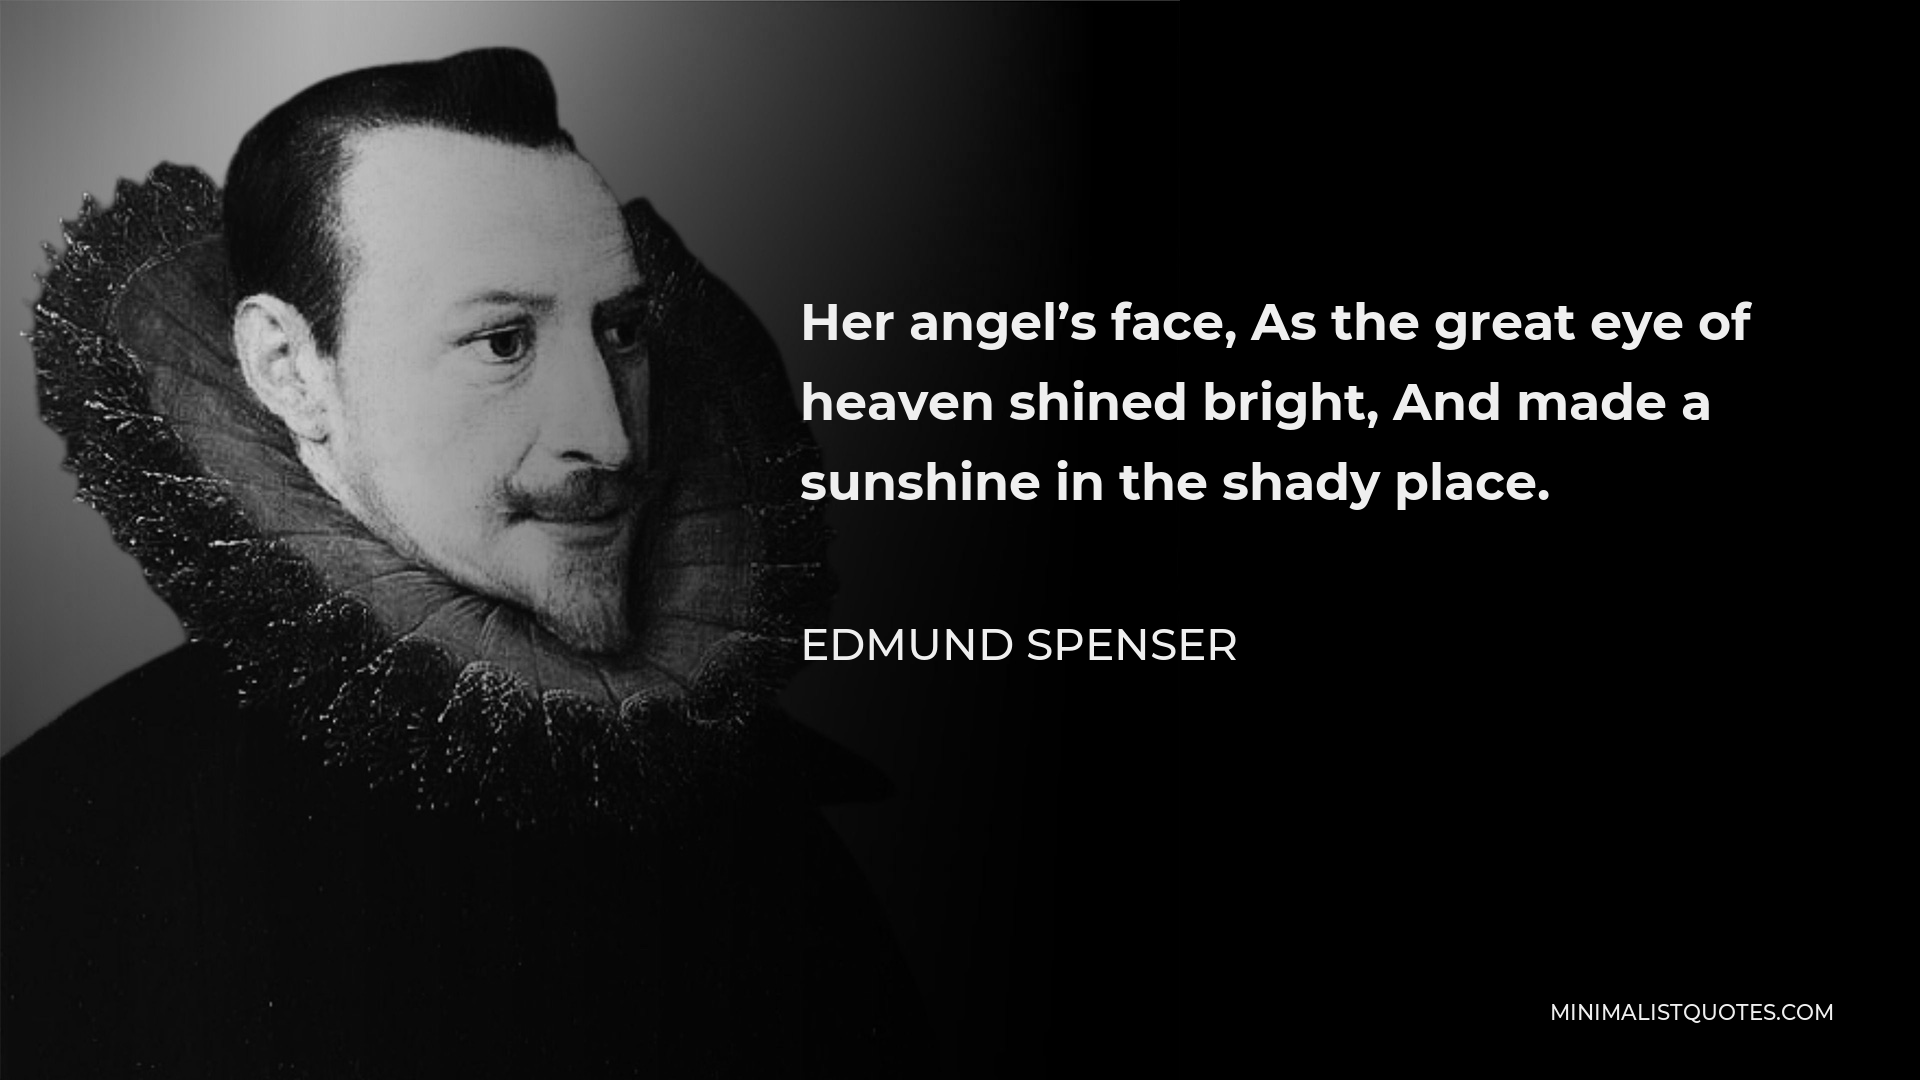 Edmund Spenser Quote - Her angel’s face, As the great eye of heaven shined bright, And made a sunshine in the shady place.